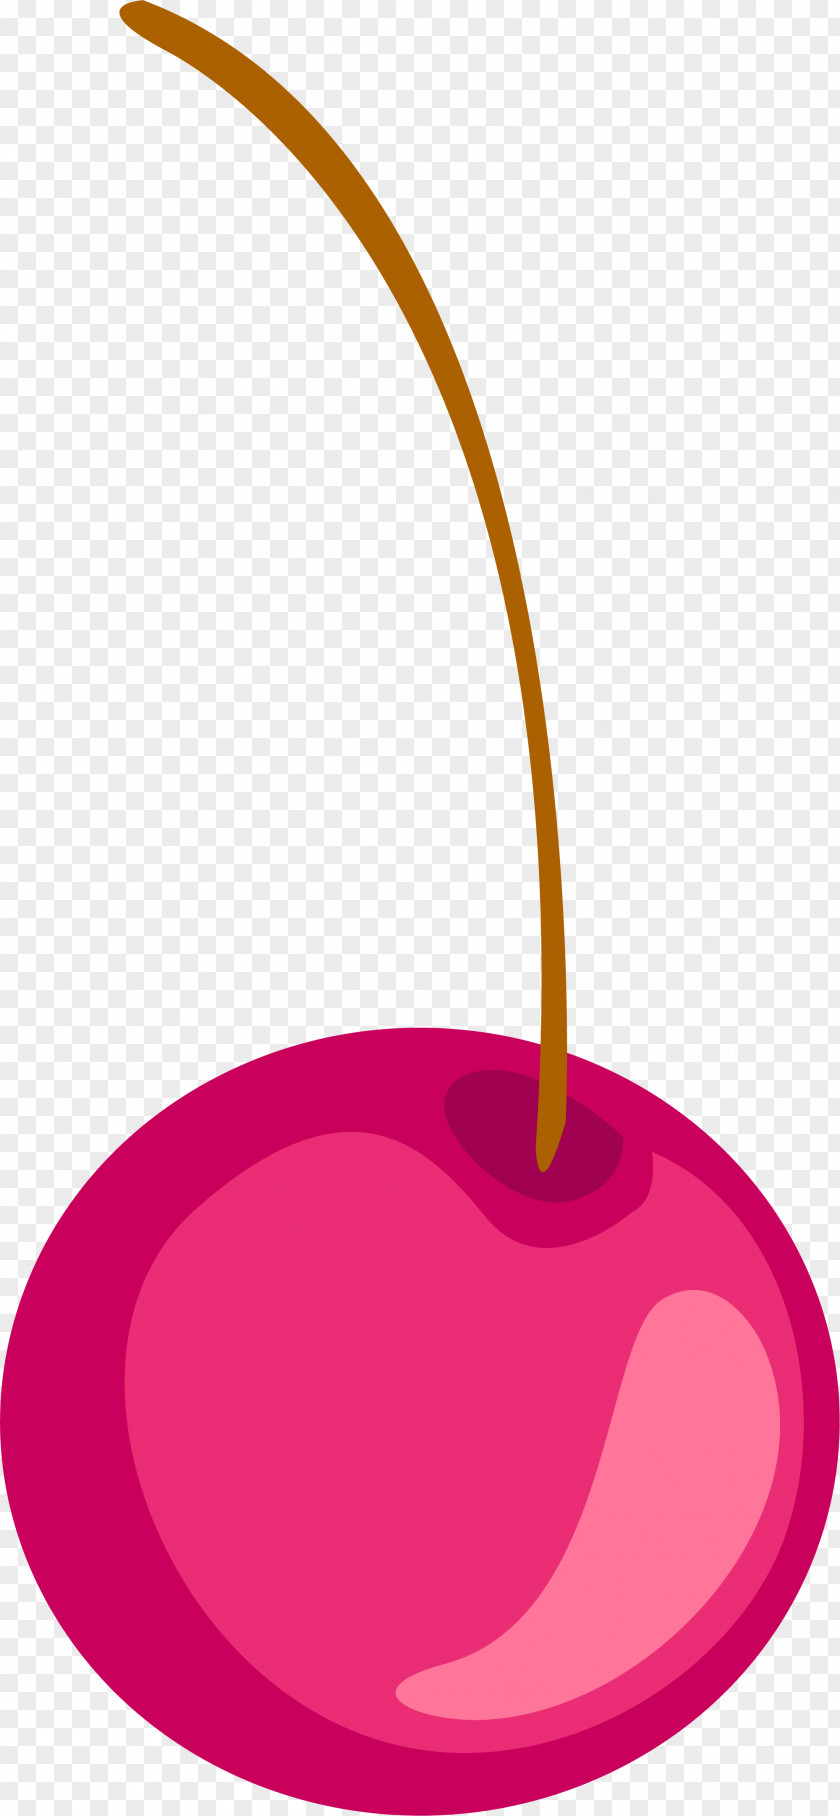 Small Fresh Purple Cherry Google Images Clip Art PNG